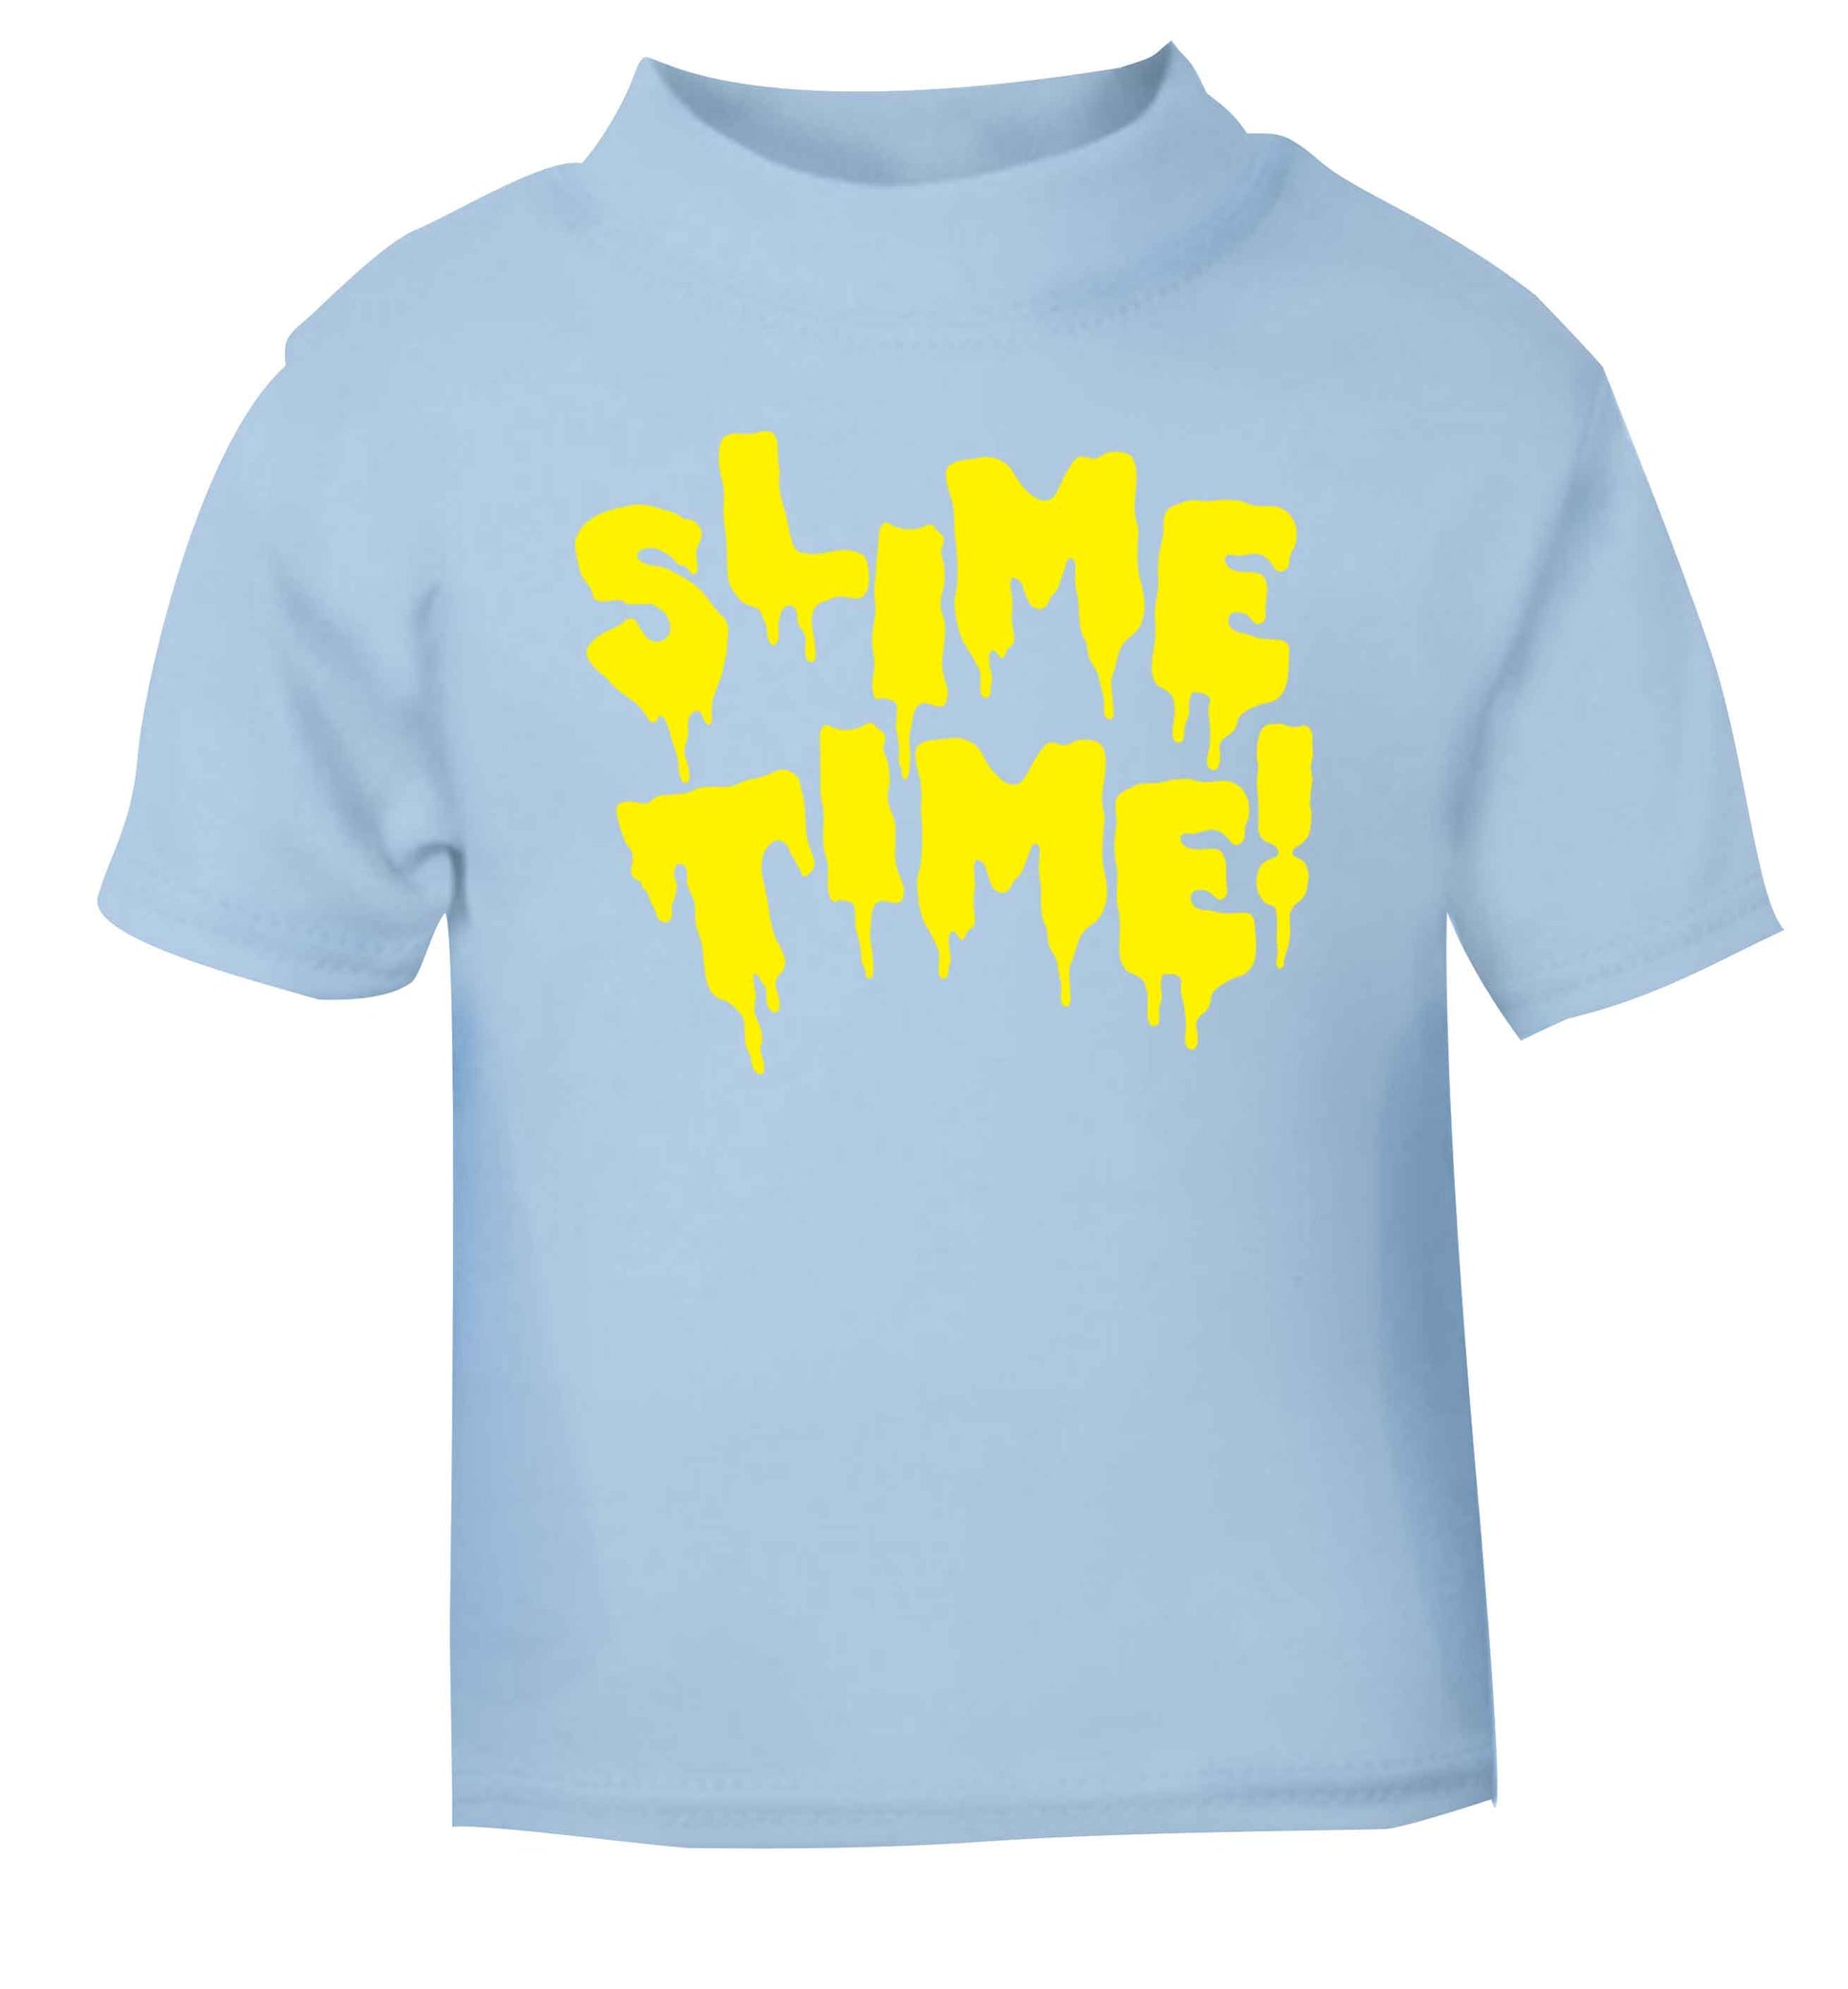 Neon yellow slime time light blue baby toddler Tshirt 2 Years